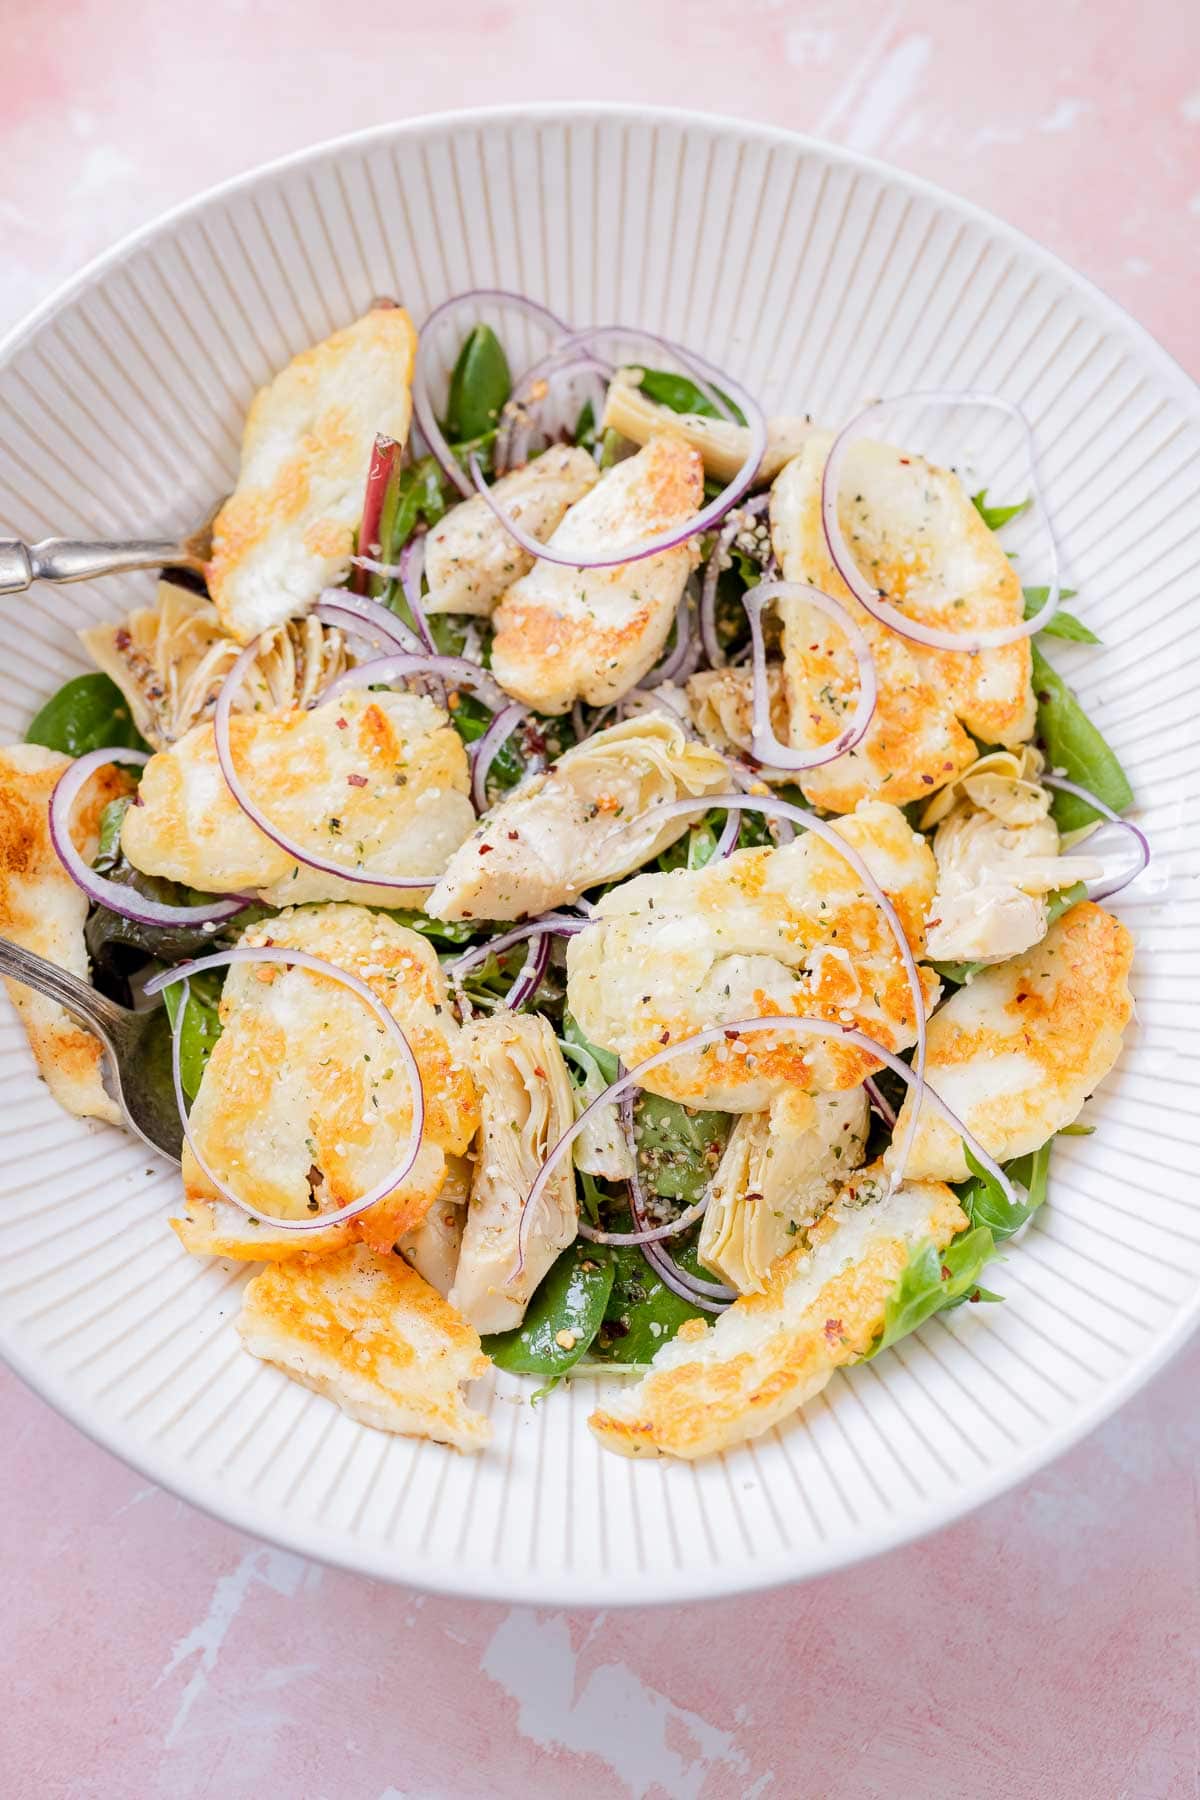 A large white bowl of salad with greens, red onion slices, seeds and crispy halloumi cheese slices.